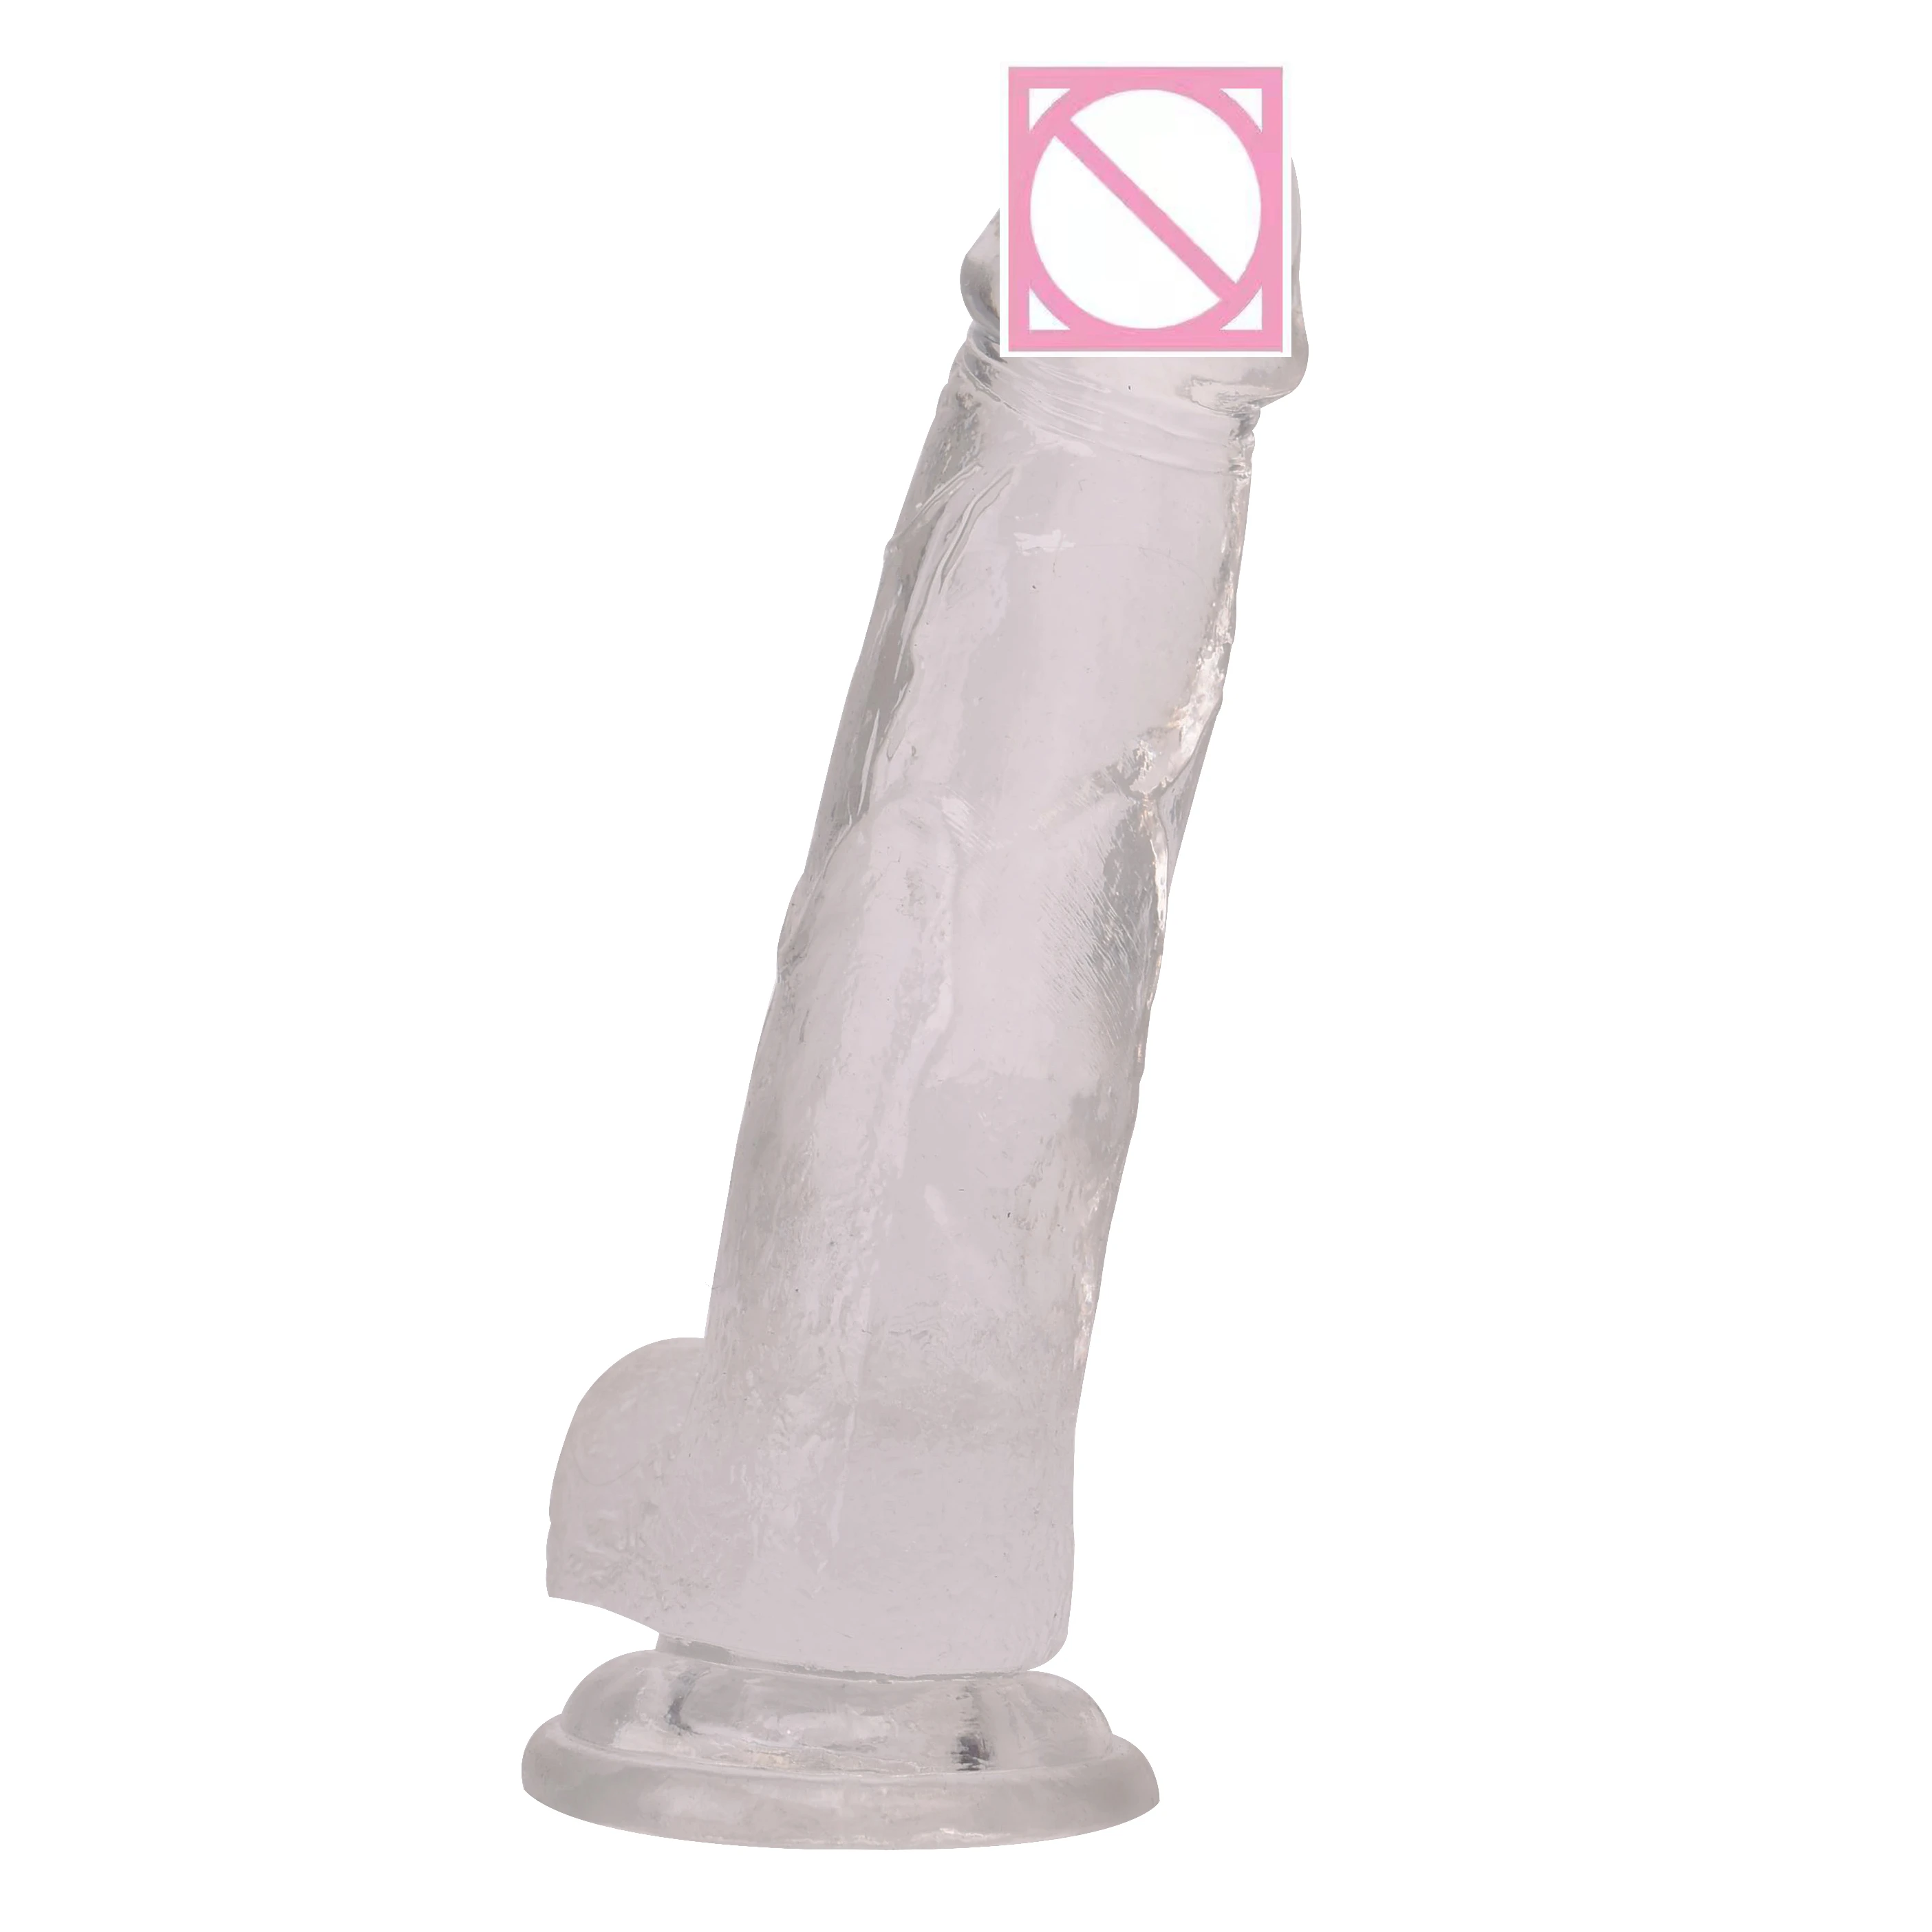 Dick Sex Toys For Women - Wholesale Natural Silicone Clear Thick Dildo Secret Sex Toy Jueguetes  Sexual Porn Sex Toys For Men And Women Sextoy Sex Machine - Buy Natural  Silicon Man Made Penis Massage Products Xnxxx Video